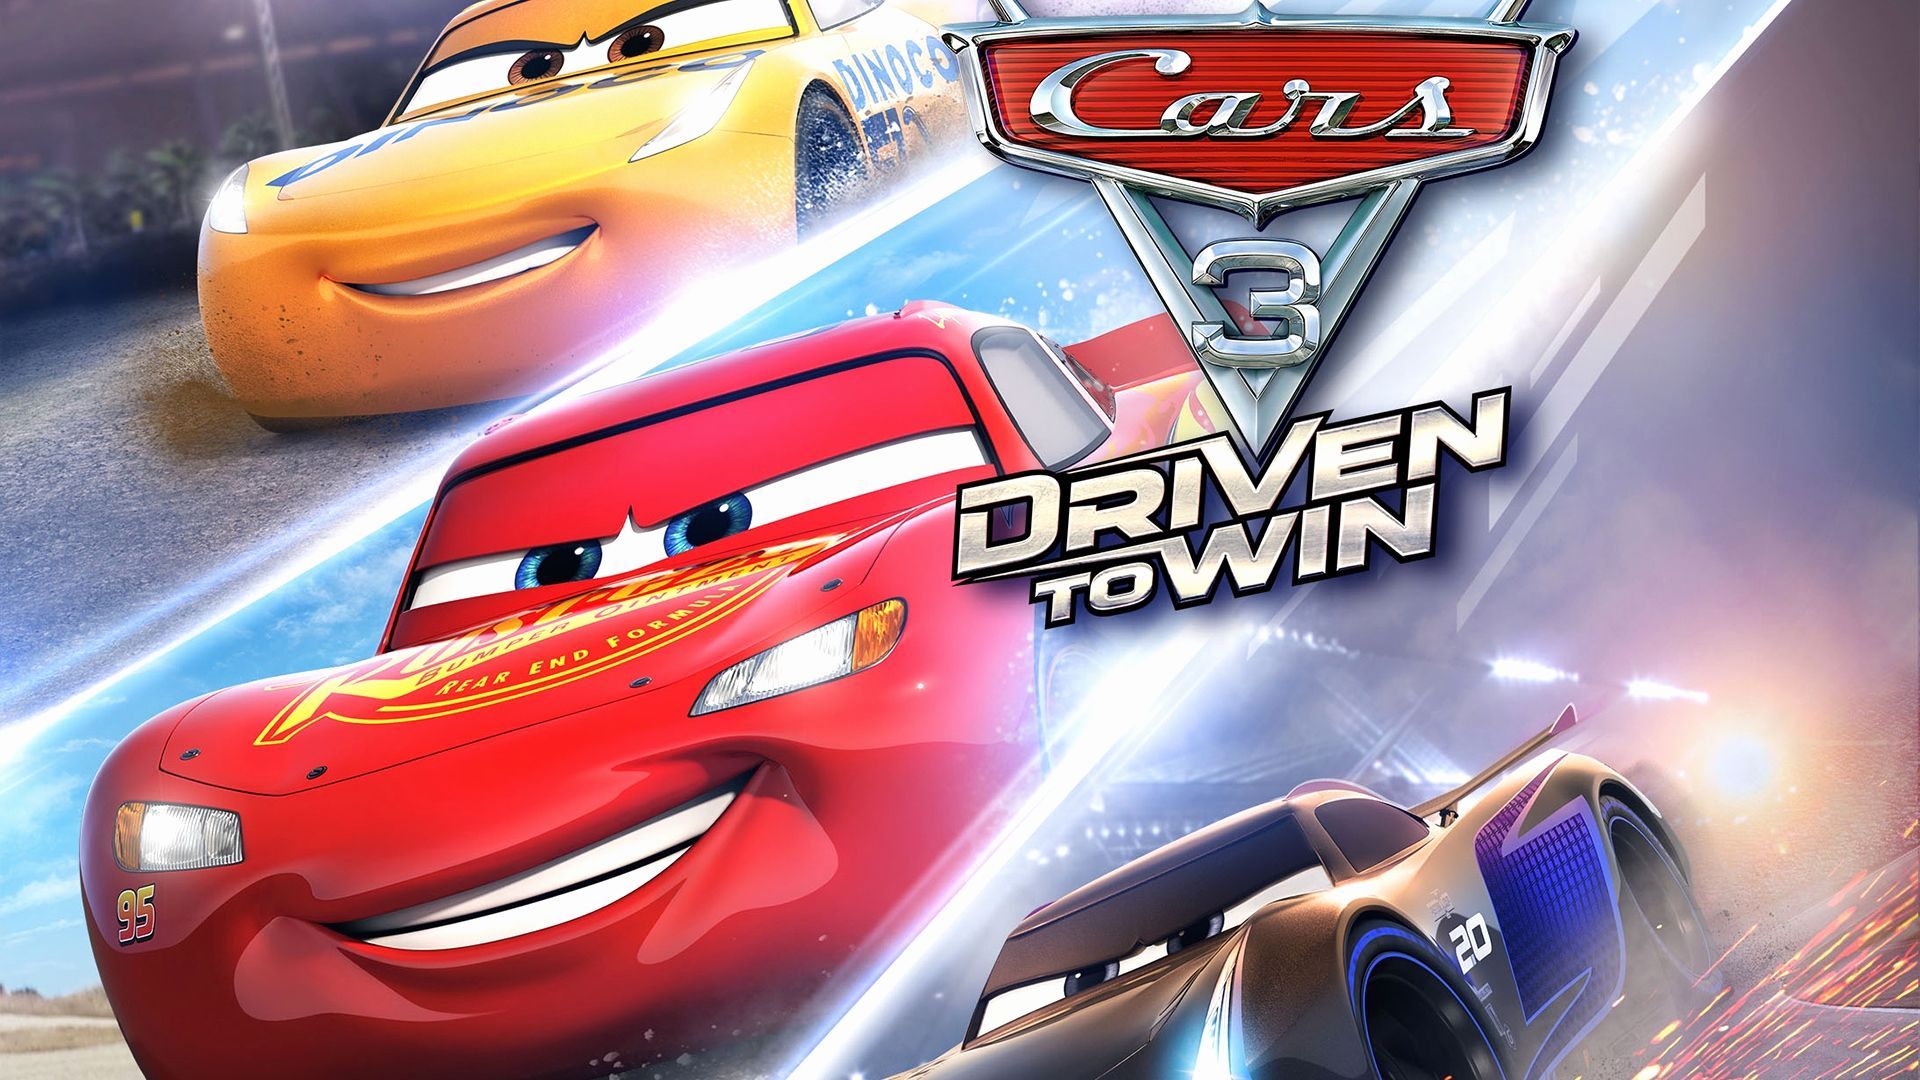 P cars 3. Cars 3 Driven to win ps3. Cars 2 ps3. Cars 3 Xbox. Тачки 2 игра.